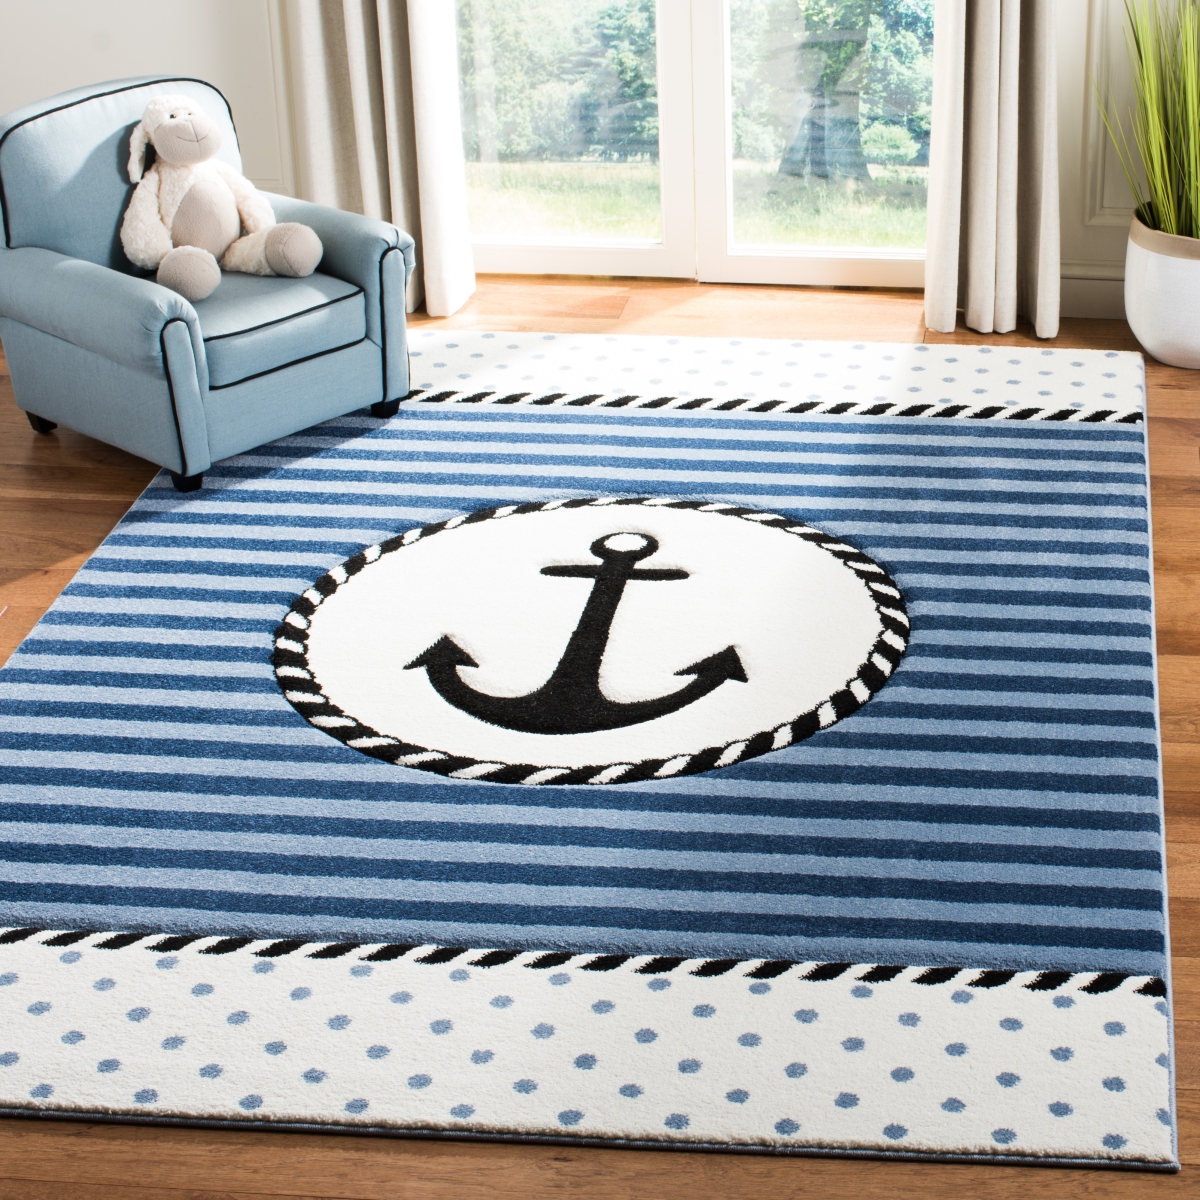 Crk124n-5 5 Ft. 3 In. X 7 Ft. 6 In. Carousel Kids Rectangle Power Loomed Area Rug, Navy & Ivory